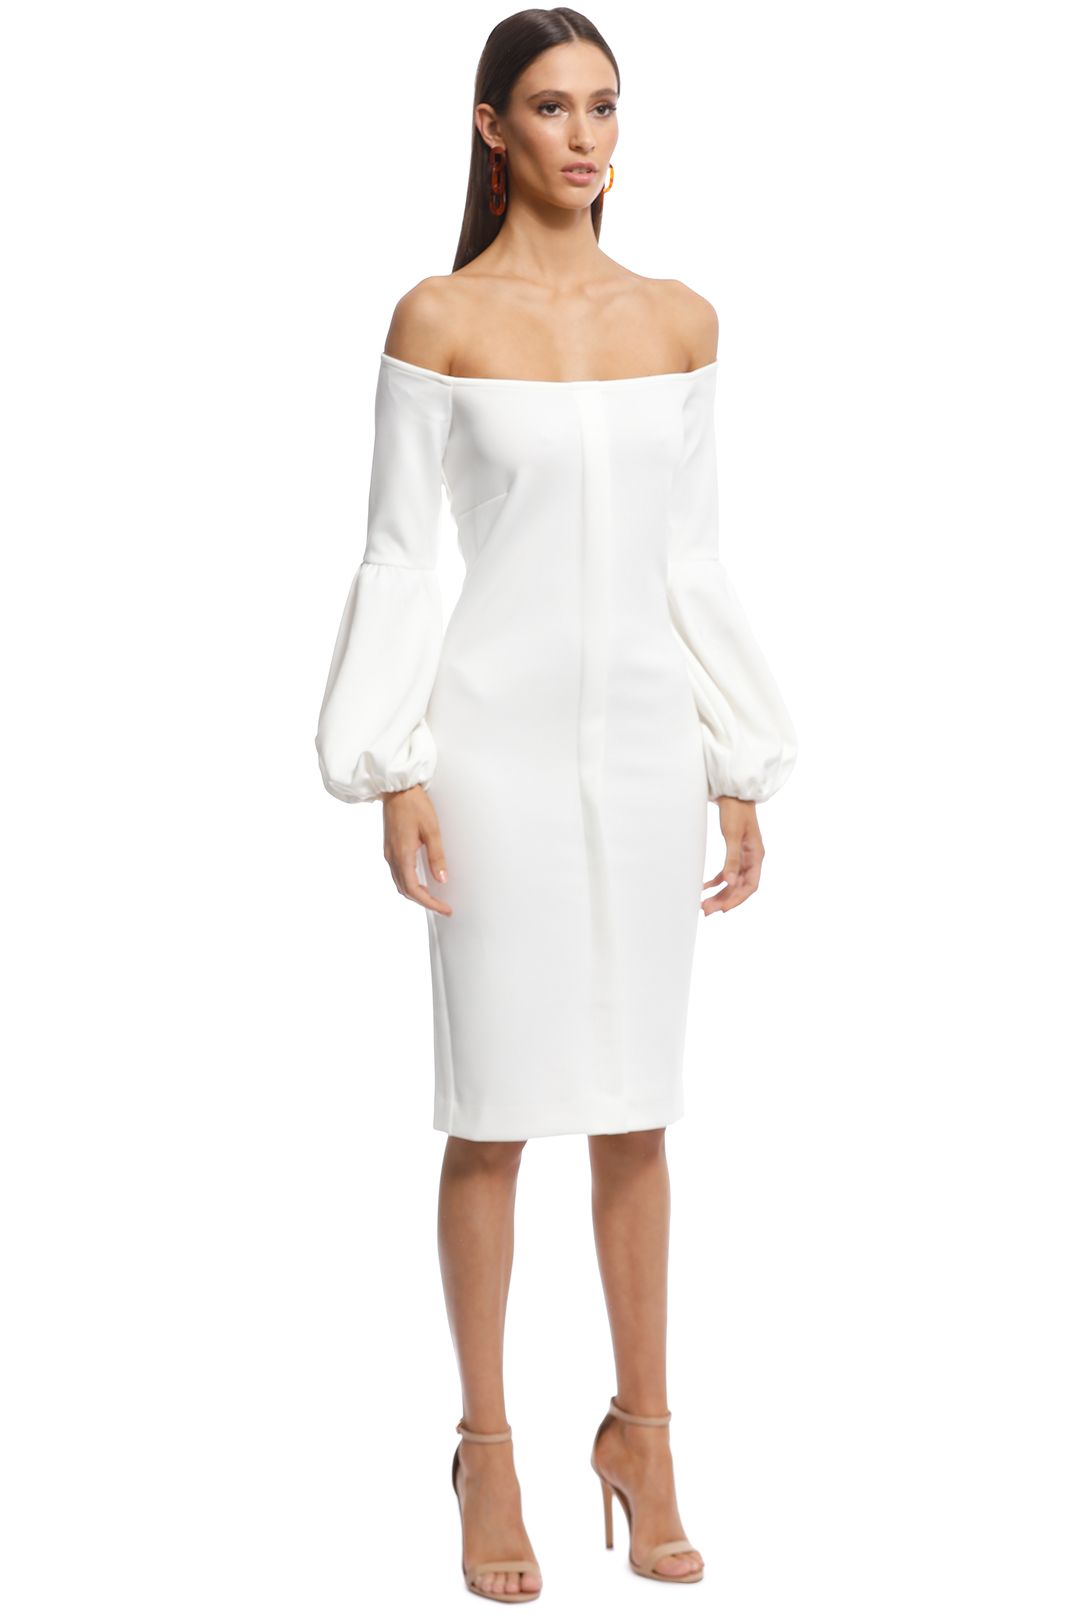 Maurie and Eve - Serres Dress - White - Side